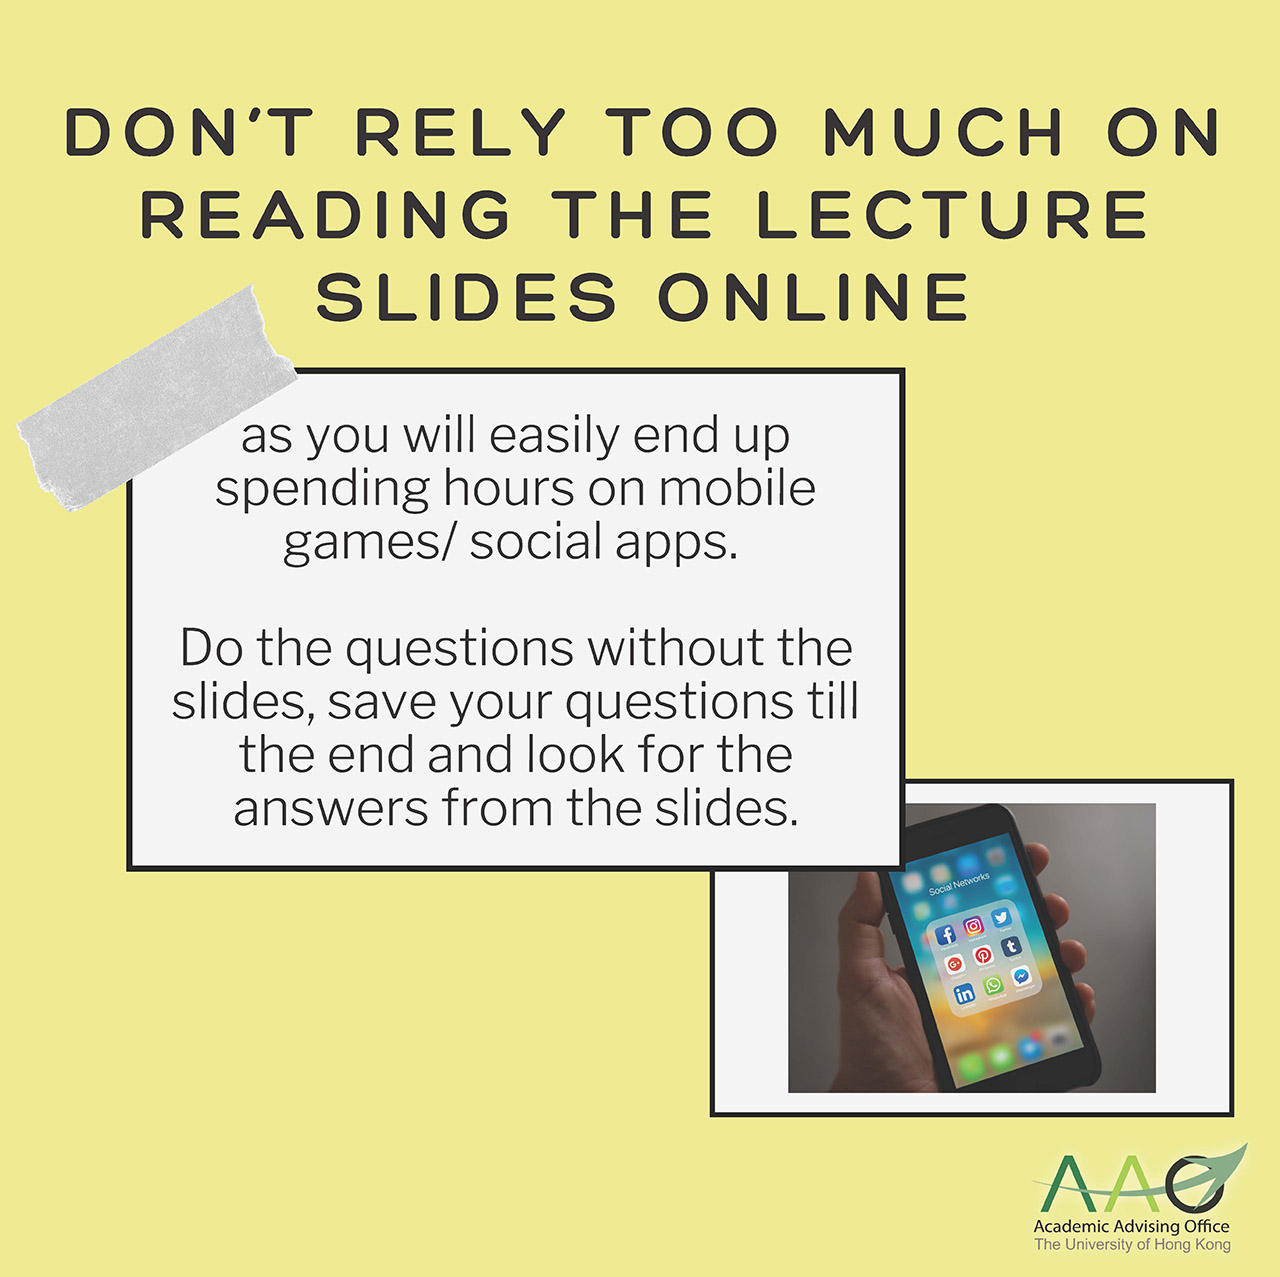 Don't rely too much on reading the lecture slides online as you will easily end up spending hours on mobile games/ social apps. Do the questions without the slides, save your questions till the end and look for the answers from the slides.